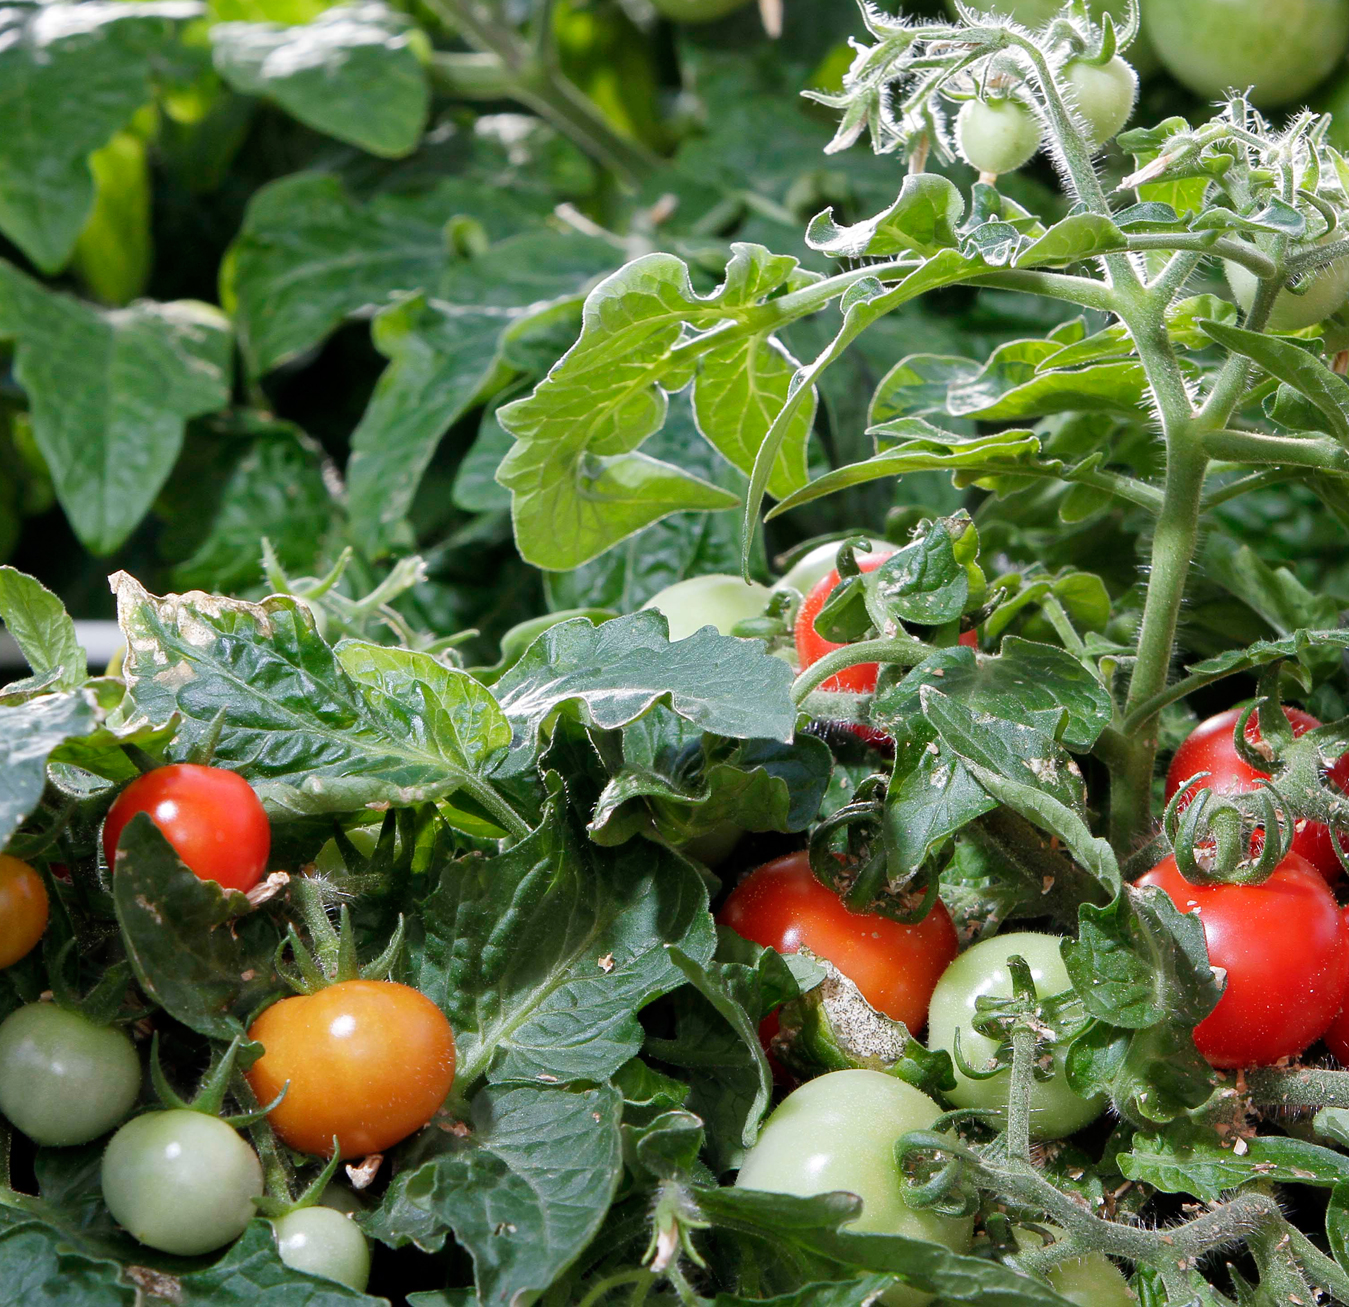 Garden Plot: Troublesome tomatoes, compost conundrums and fruit